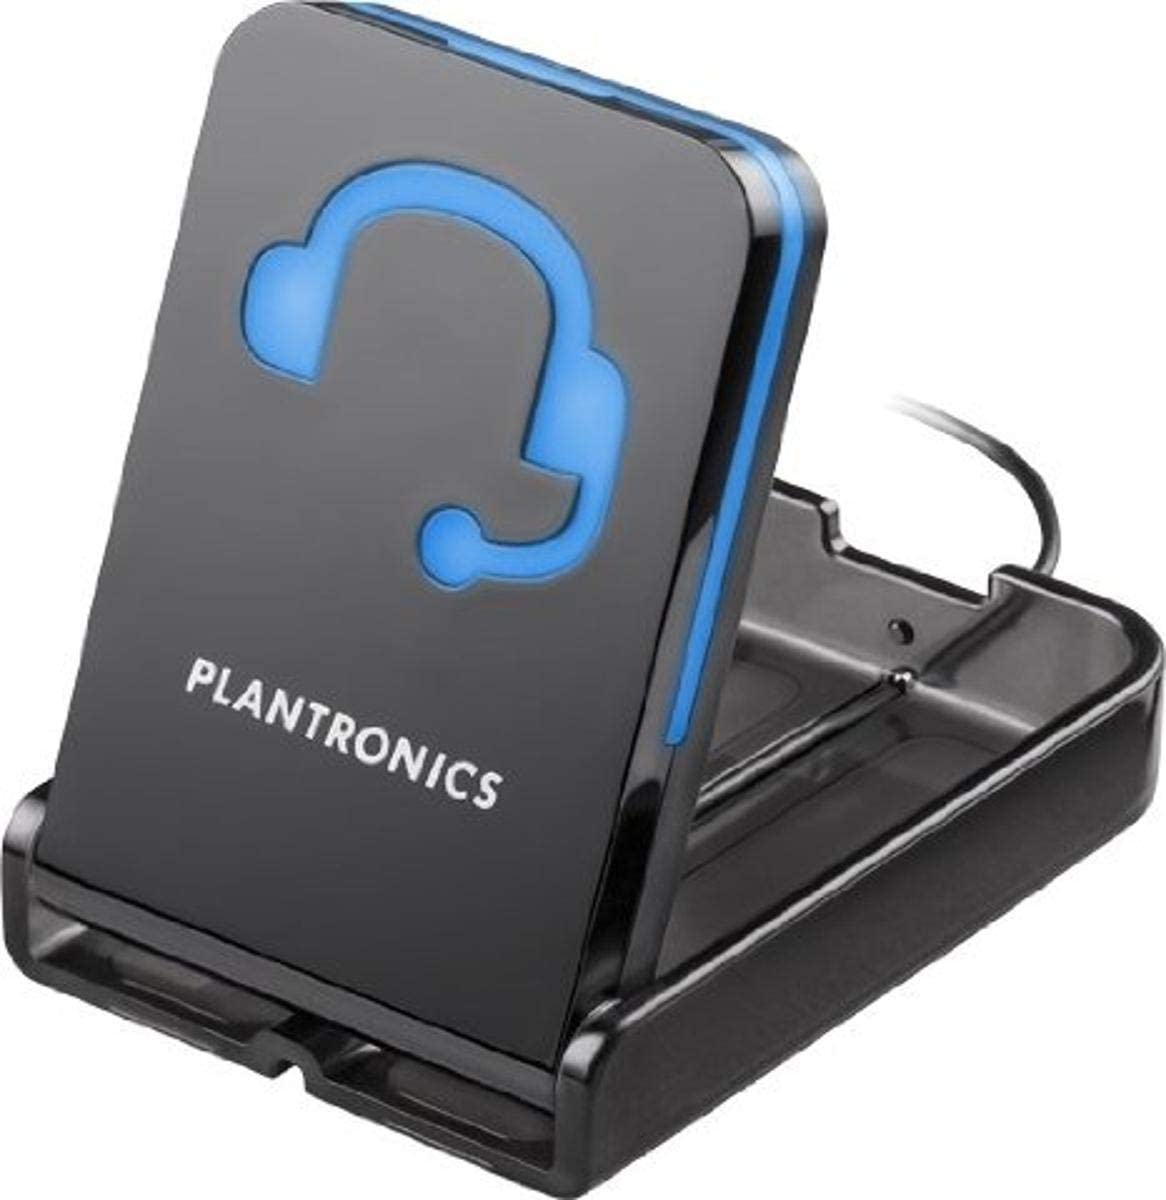 Plantronics Wireless Headset Indicator Light (Poly) with Wide 180 Degree Viewing Angle